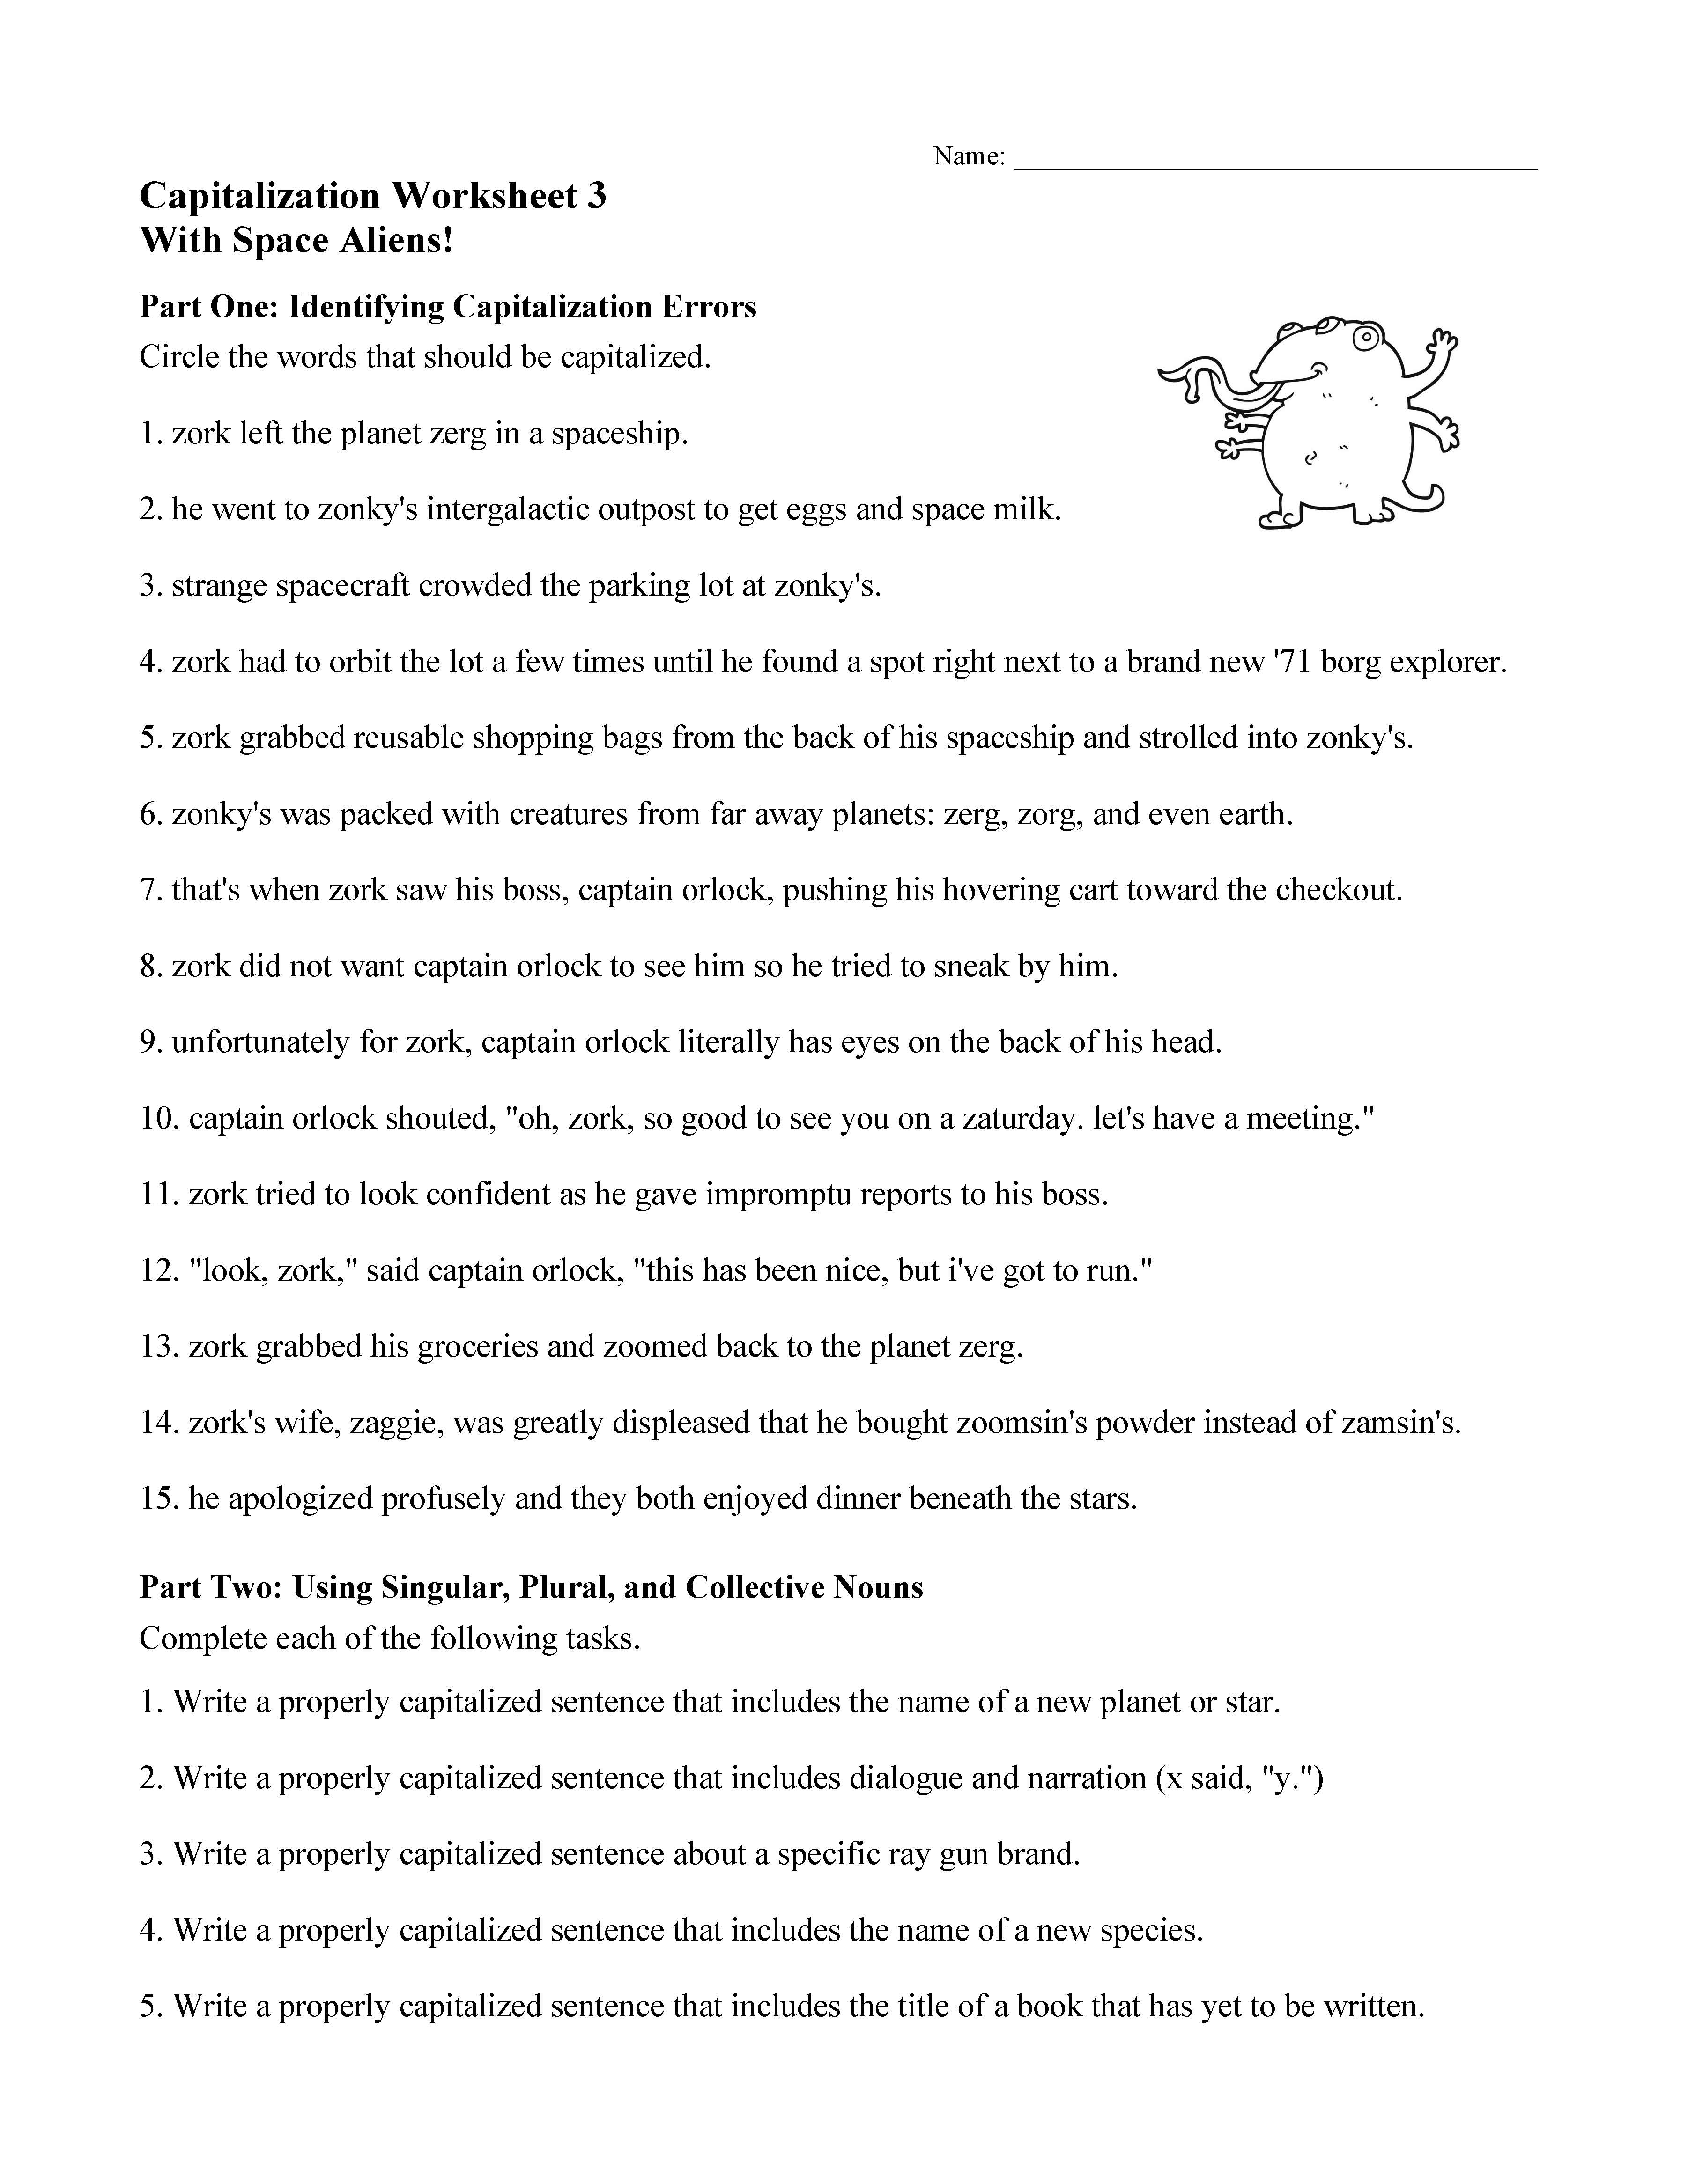 This is a preview image of Capitalization Worksheet 3. Click on it to enlarge it or view the source file.